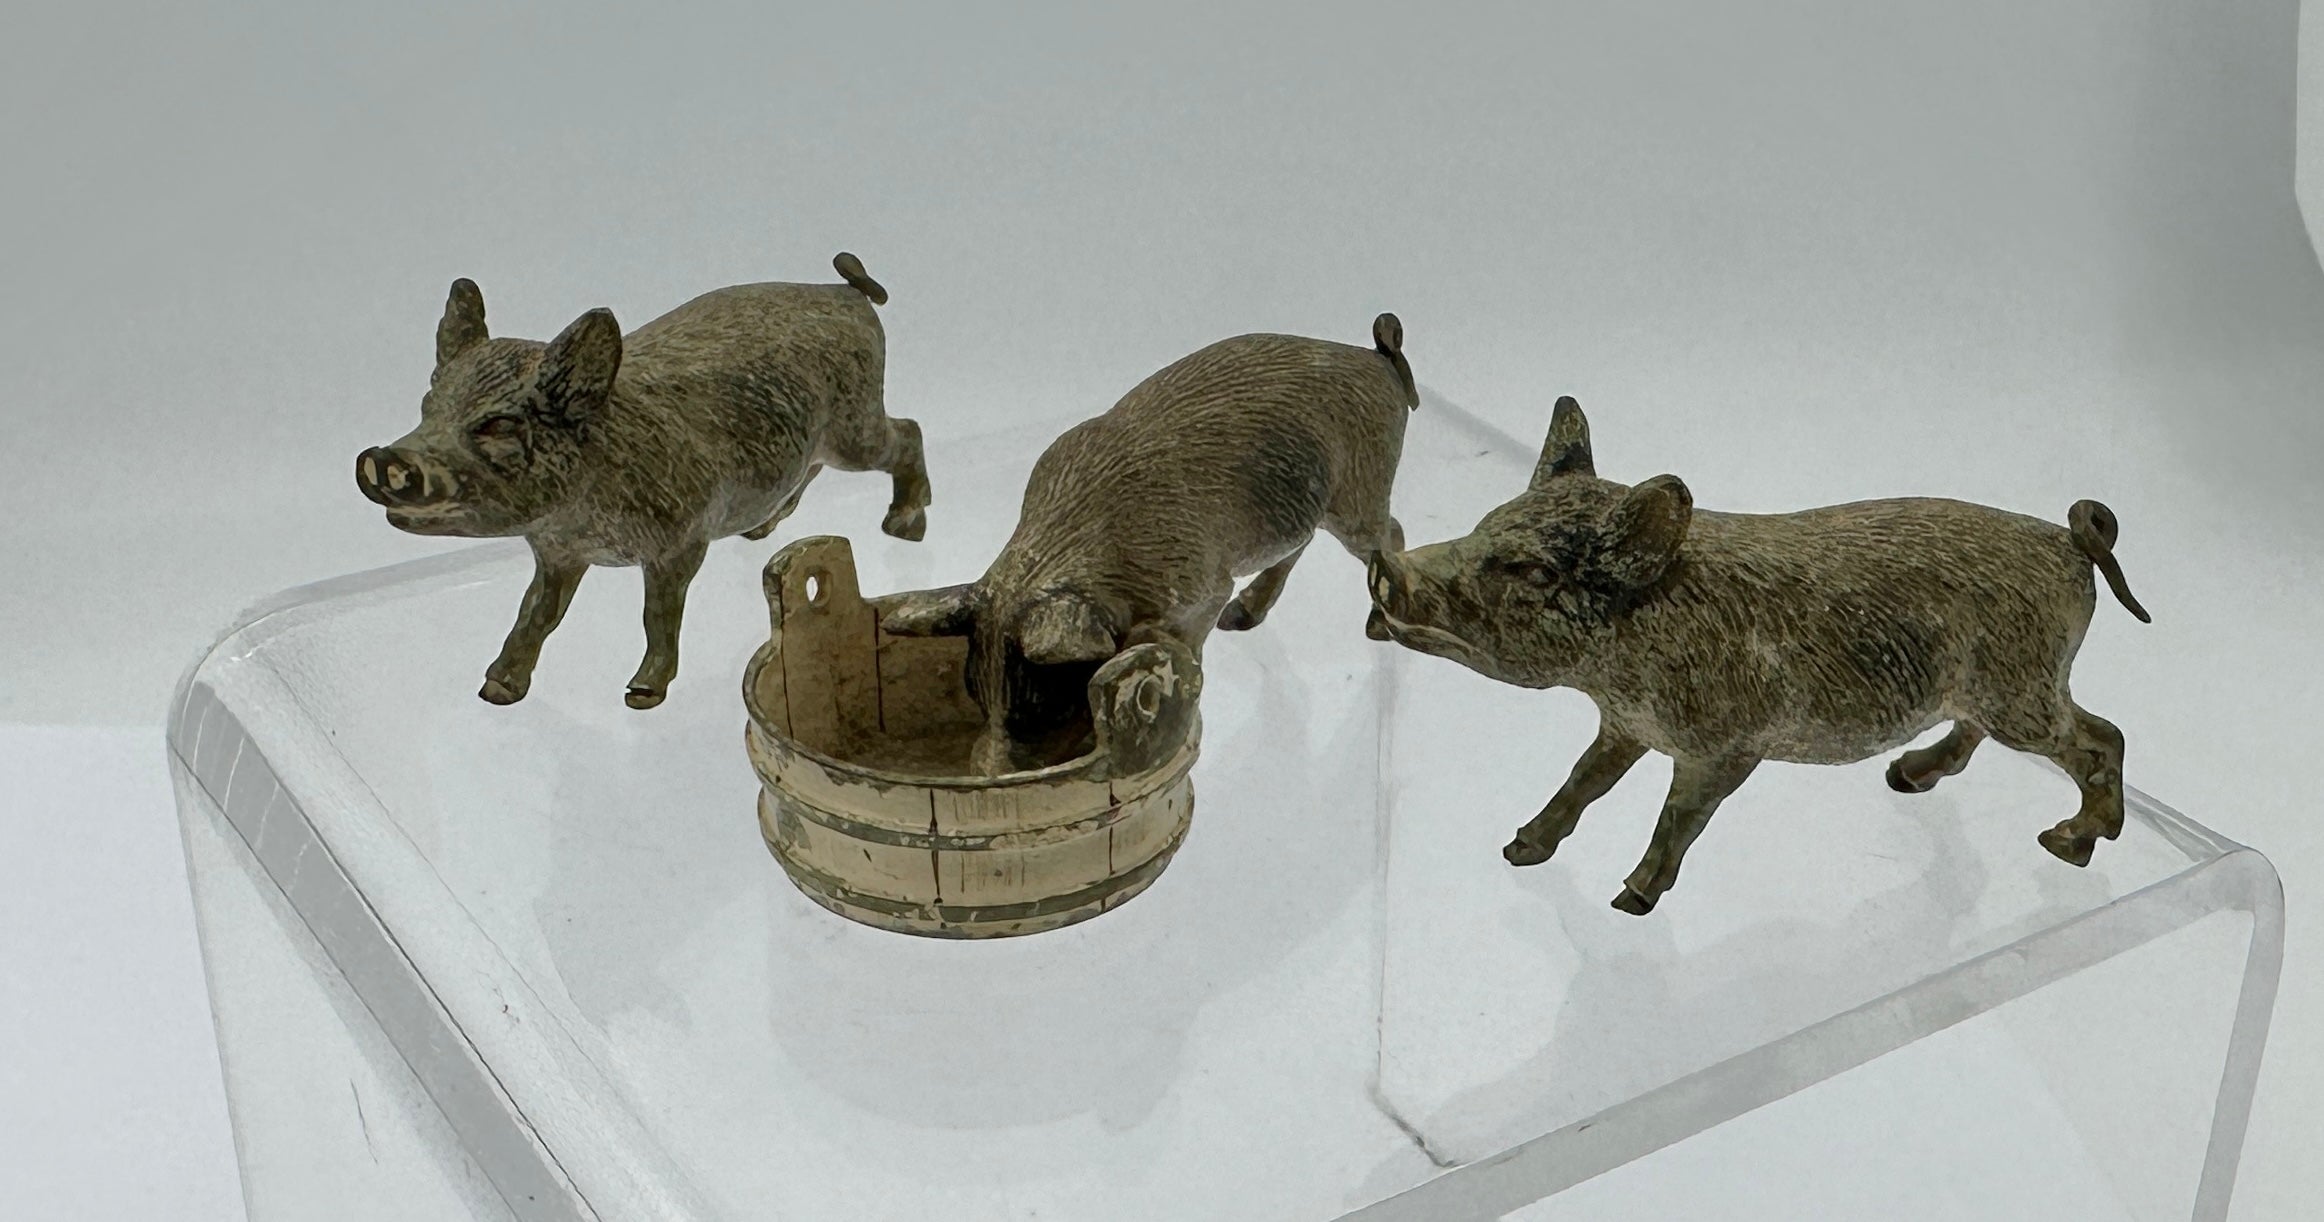 THIS IS A SUPERB SET OF THREE LITTLE PIGS BRONZES.  THE PIGS ARE ANTIQUE AUSTRIAN VIENNA BRONZES.
These wonderful antique Austrian Vienna Bronzes (Bronze de Vienne, Wiener Bronze, Cold Painted Bronze) date to circa 1900.  The bronzes are of the